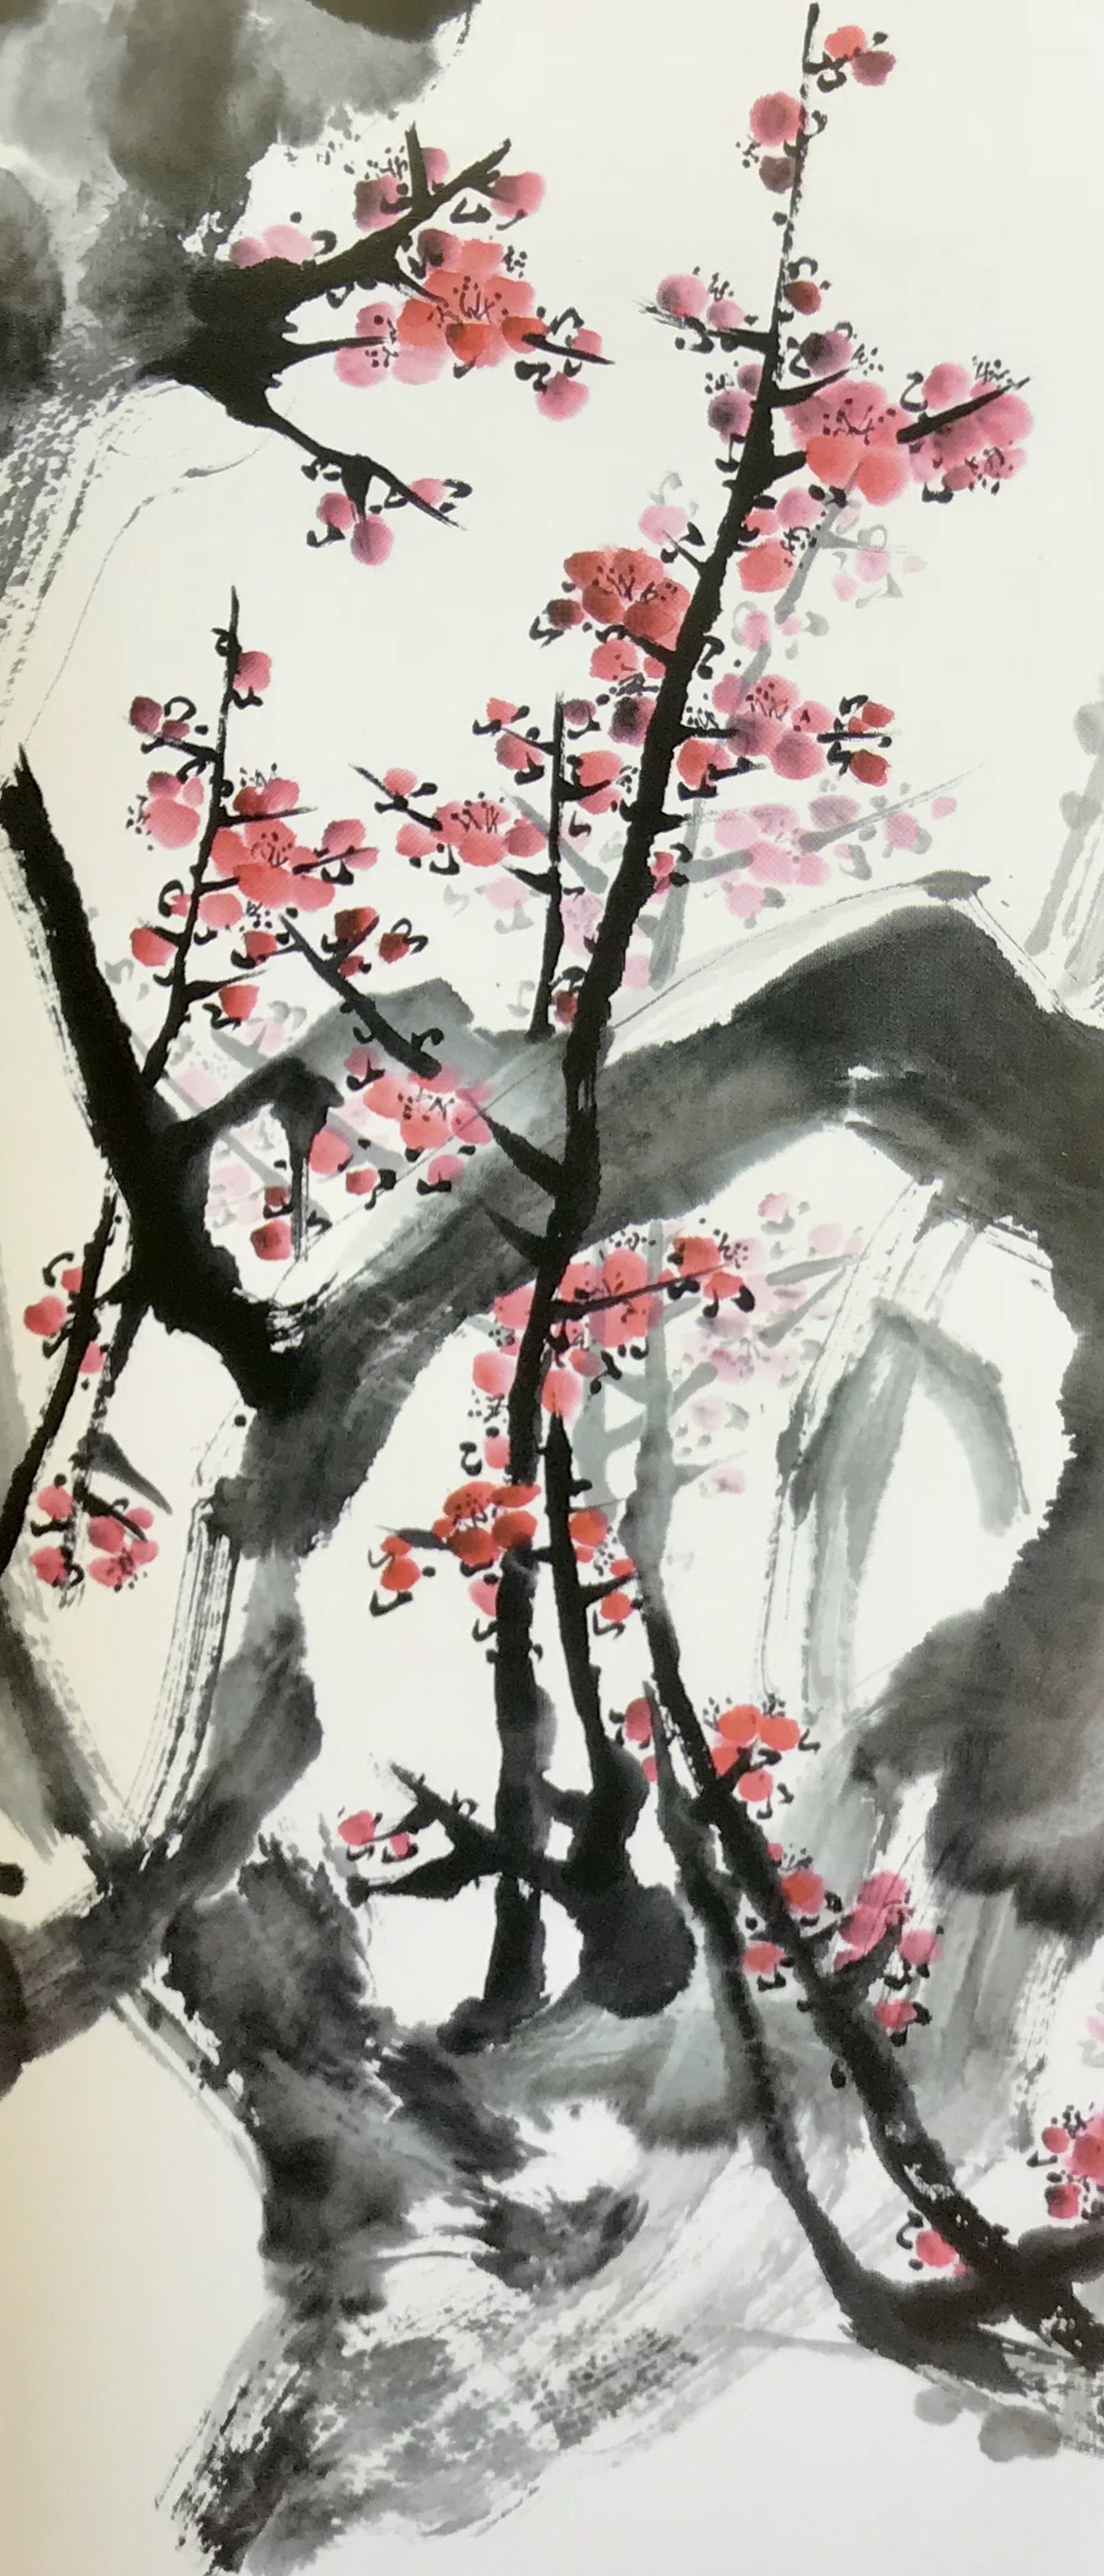 "Old Tree." painting by H.H. Dorje Chang Buddha III